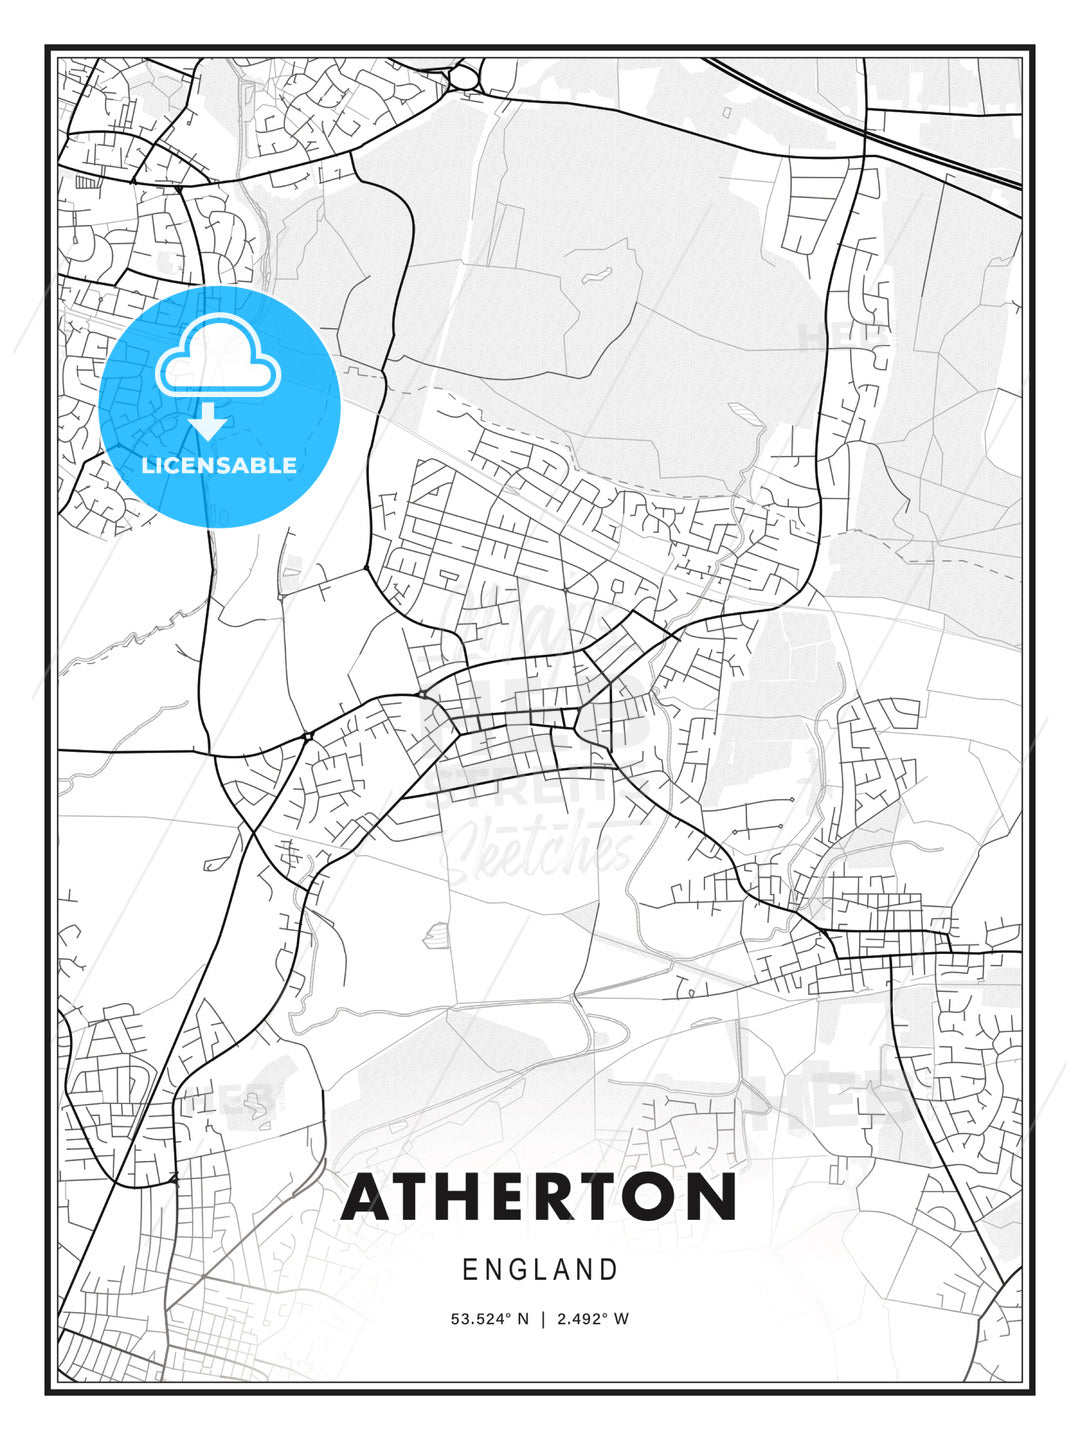 Atherton, England, Modern Print Template in Various Formats - HEBSTREITS Sketches